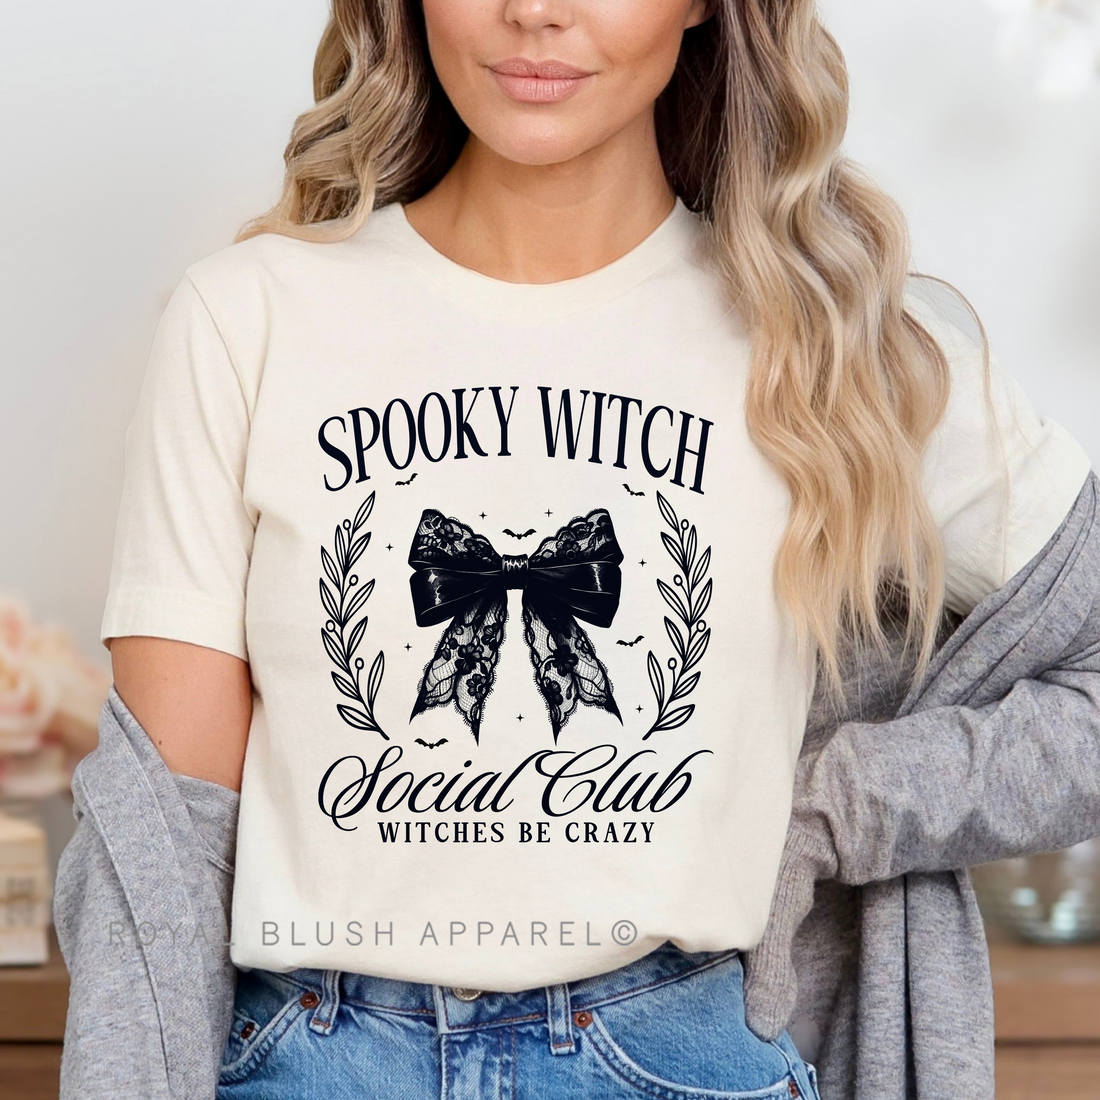 Spooky Witch Social Club Relaxed Unisex T-shirt